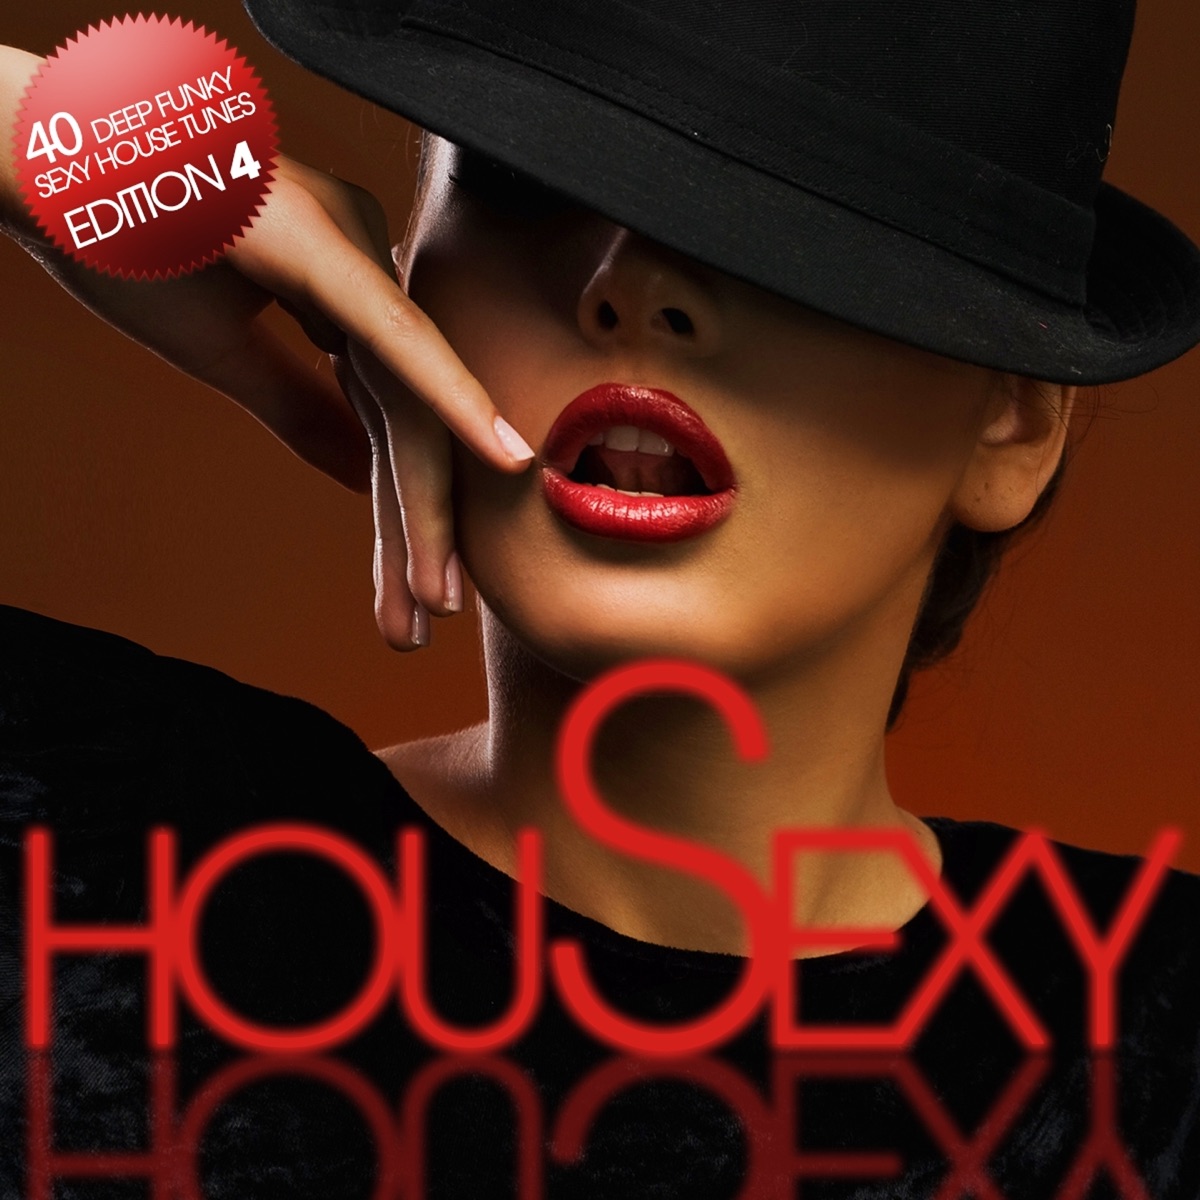 HouSexy - 40 Deep, Funky, Sexy House Tunes - Edition 4 - Album by Various  Artists - Apple Music